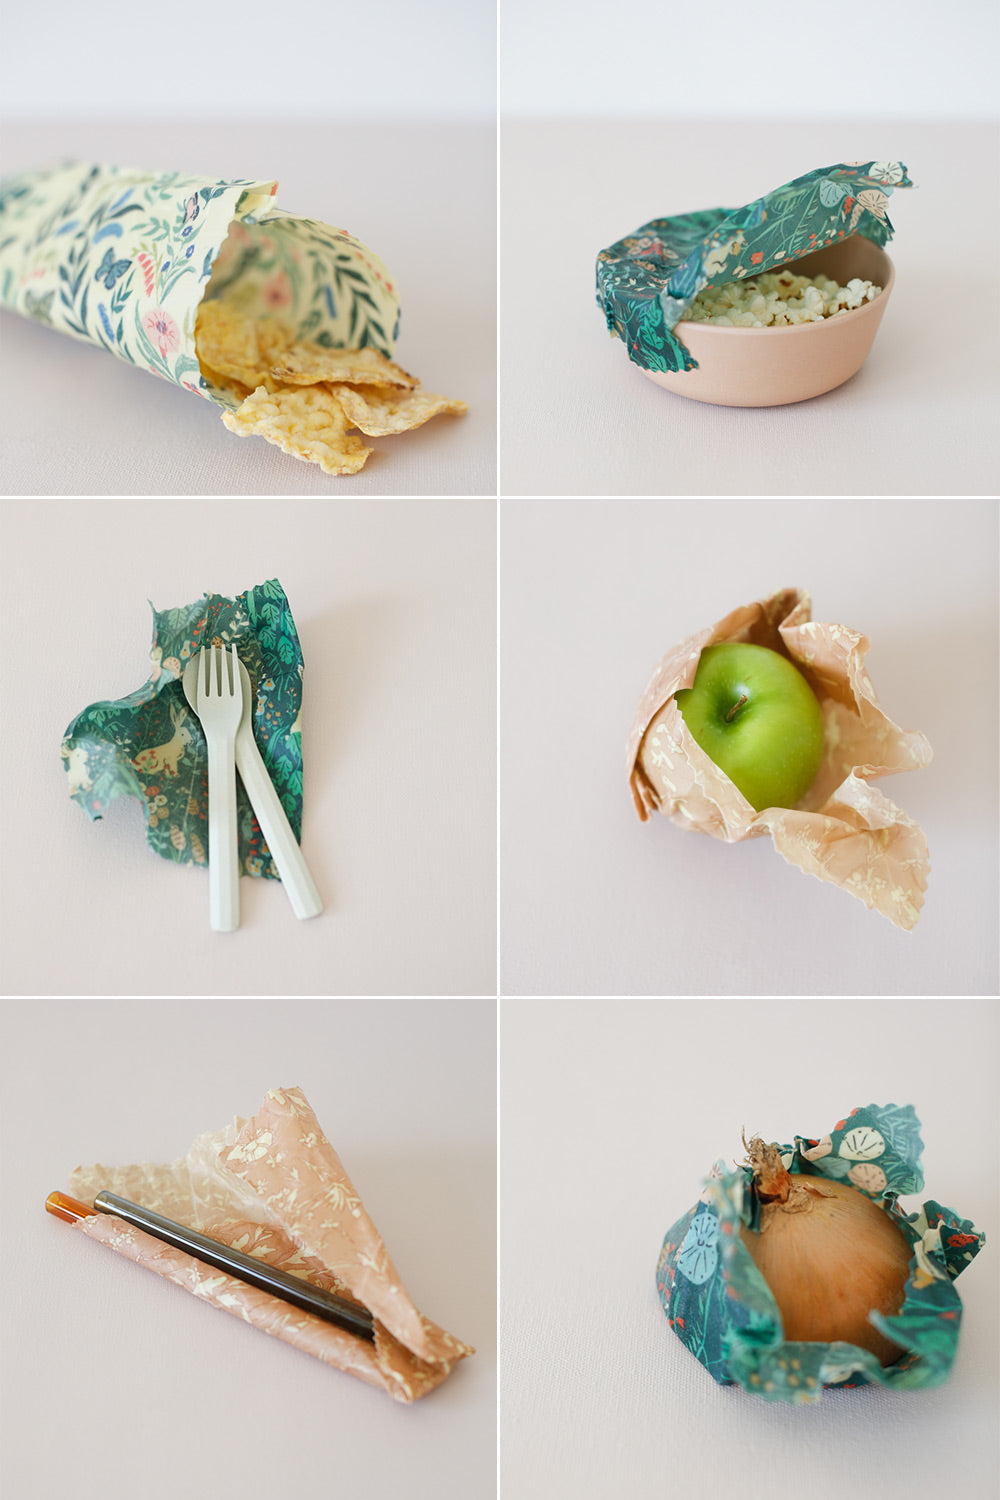 Beeswax wraps used in 6 different ways to wrap snacks, bowls, fruits, veggies, utensils and glass straws in a grid format.